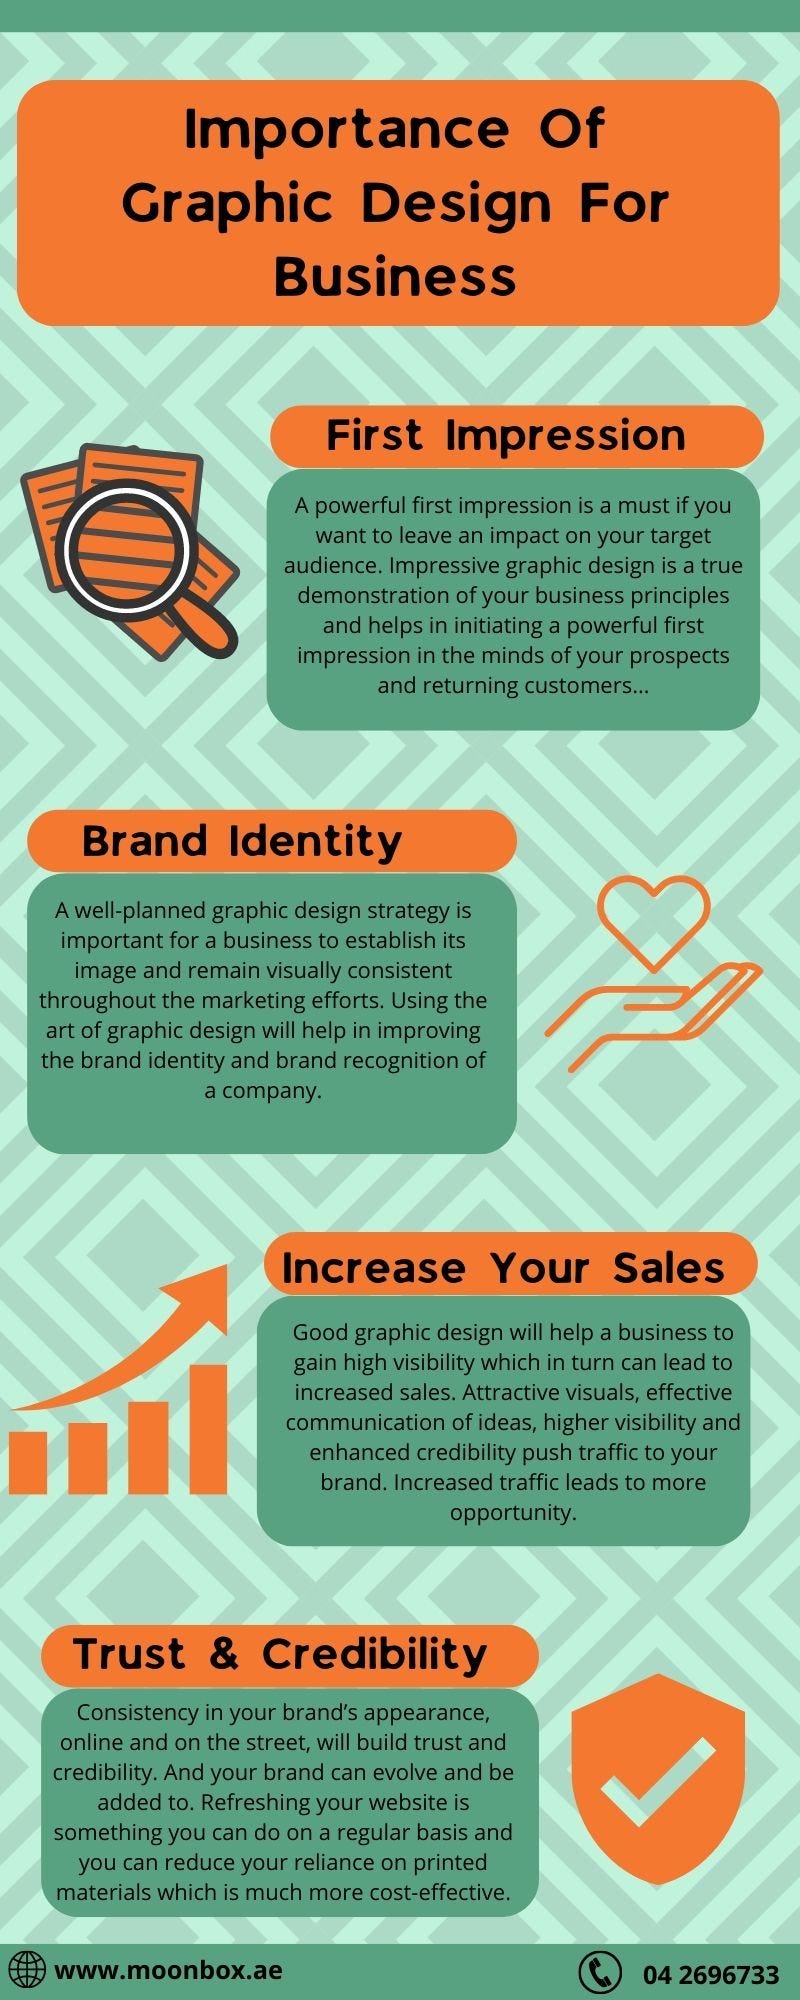 Importance of Graphic Design For Business | Infographic - MoonBox - Medium